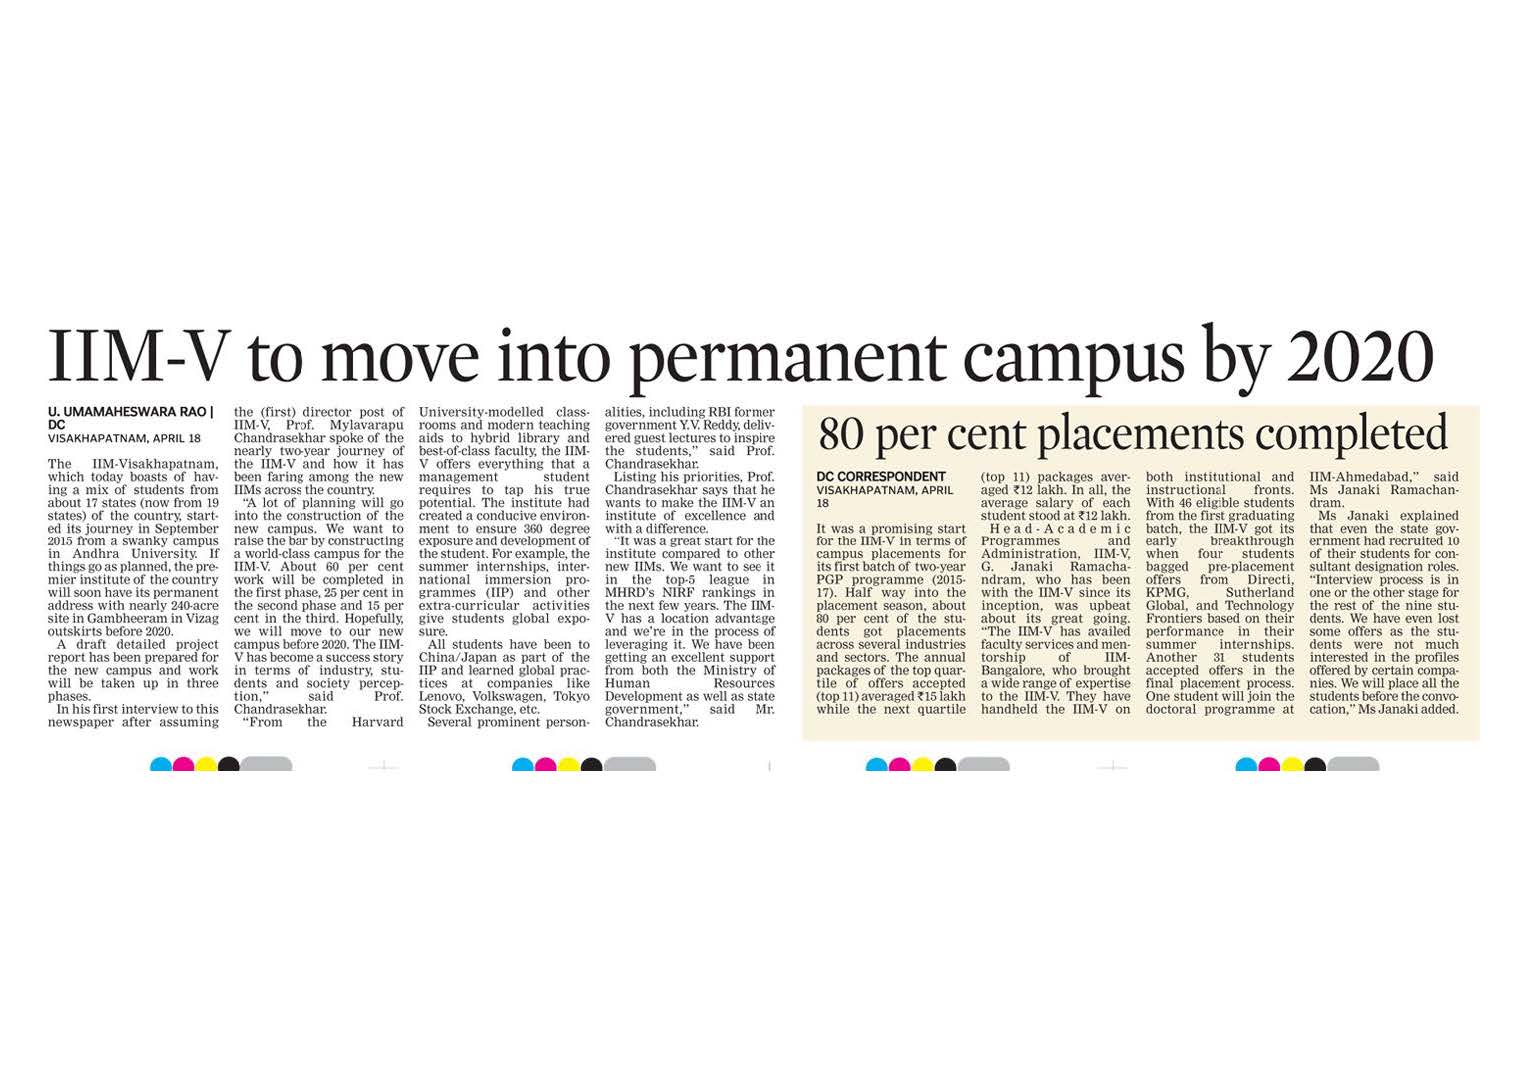 IIM-V to move into permanent campus by 2020 | 80 percent placements completed - 18.04.2017